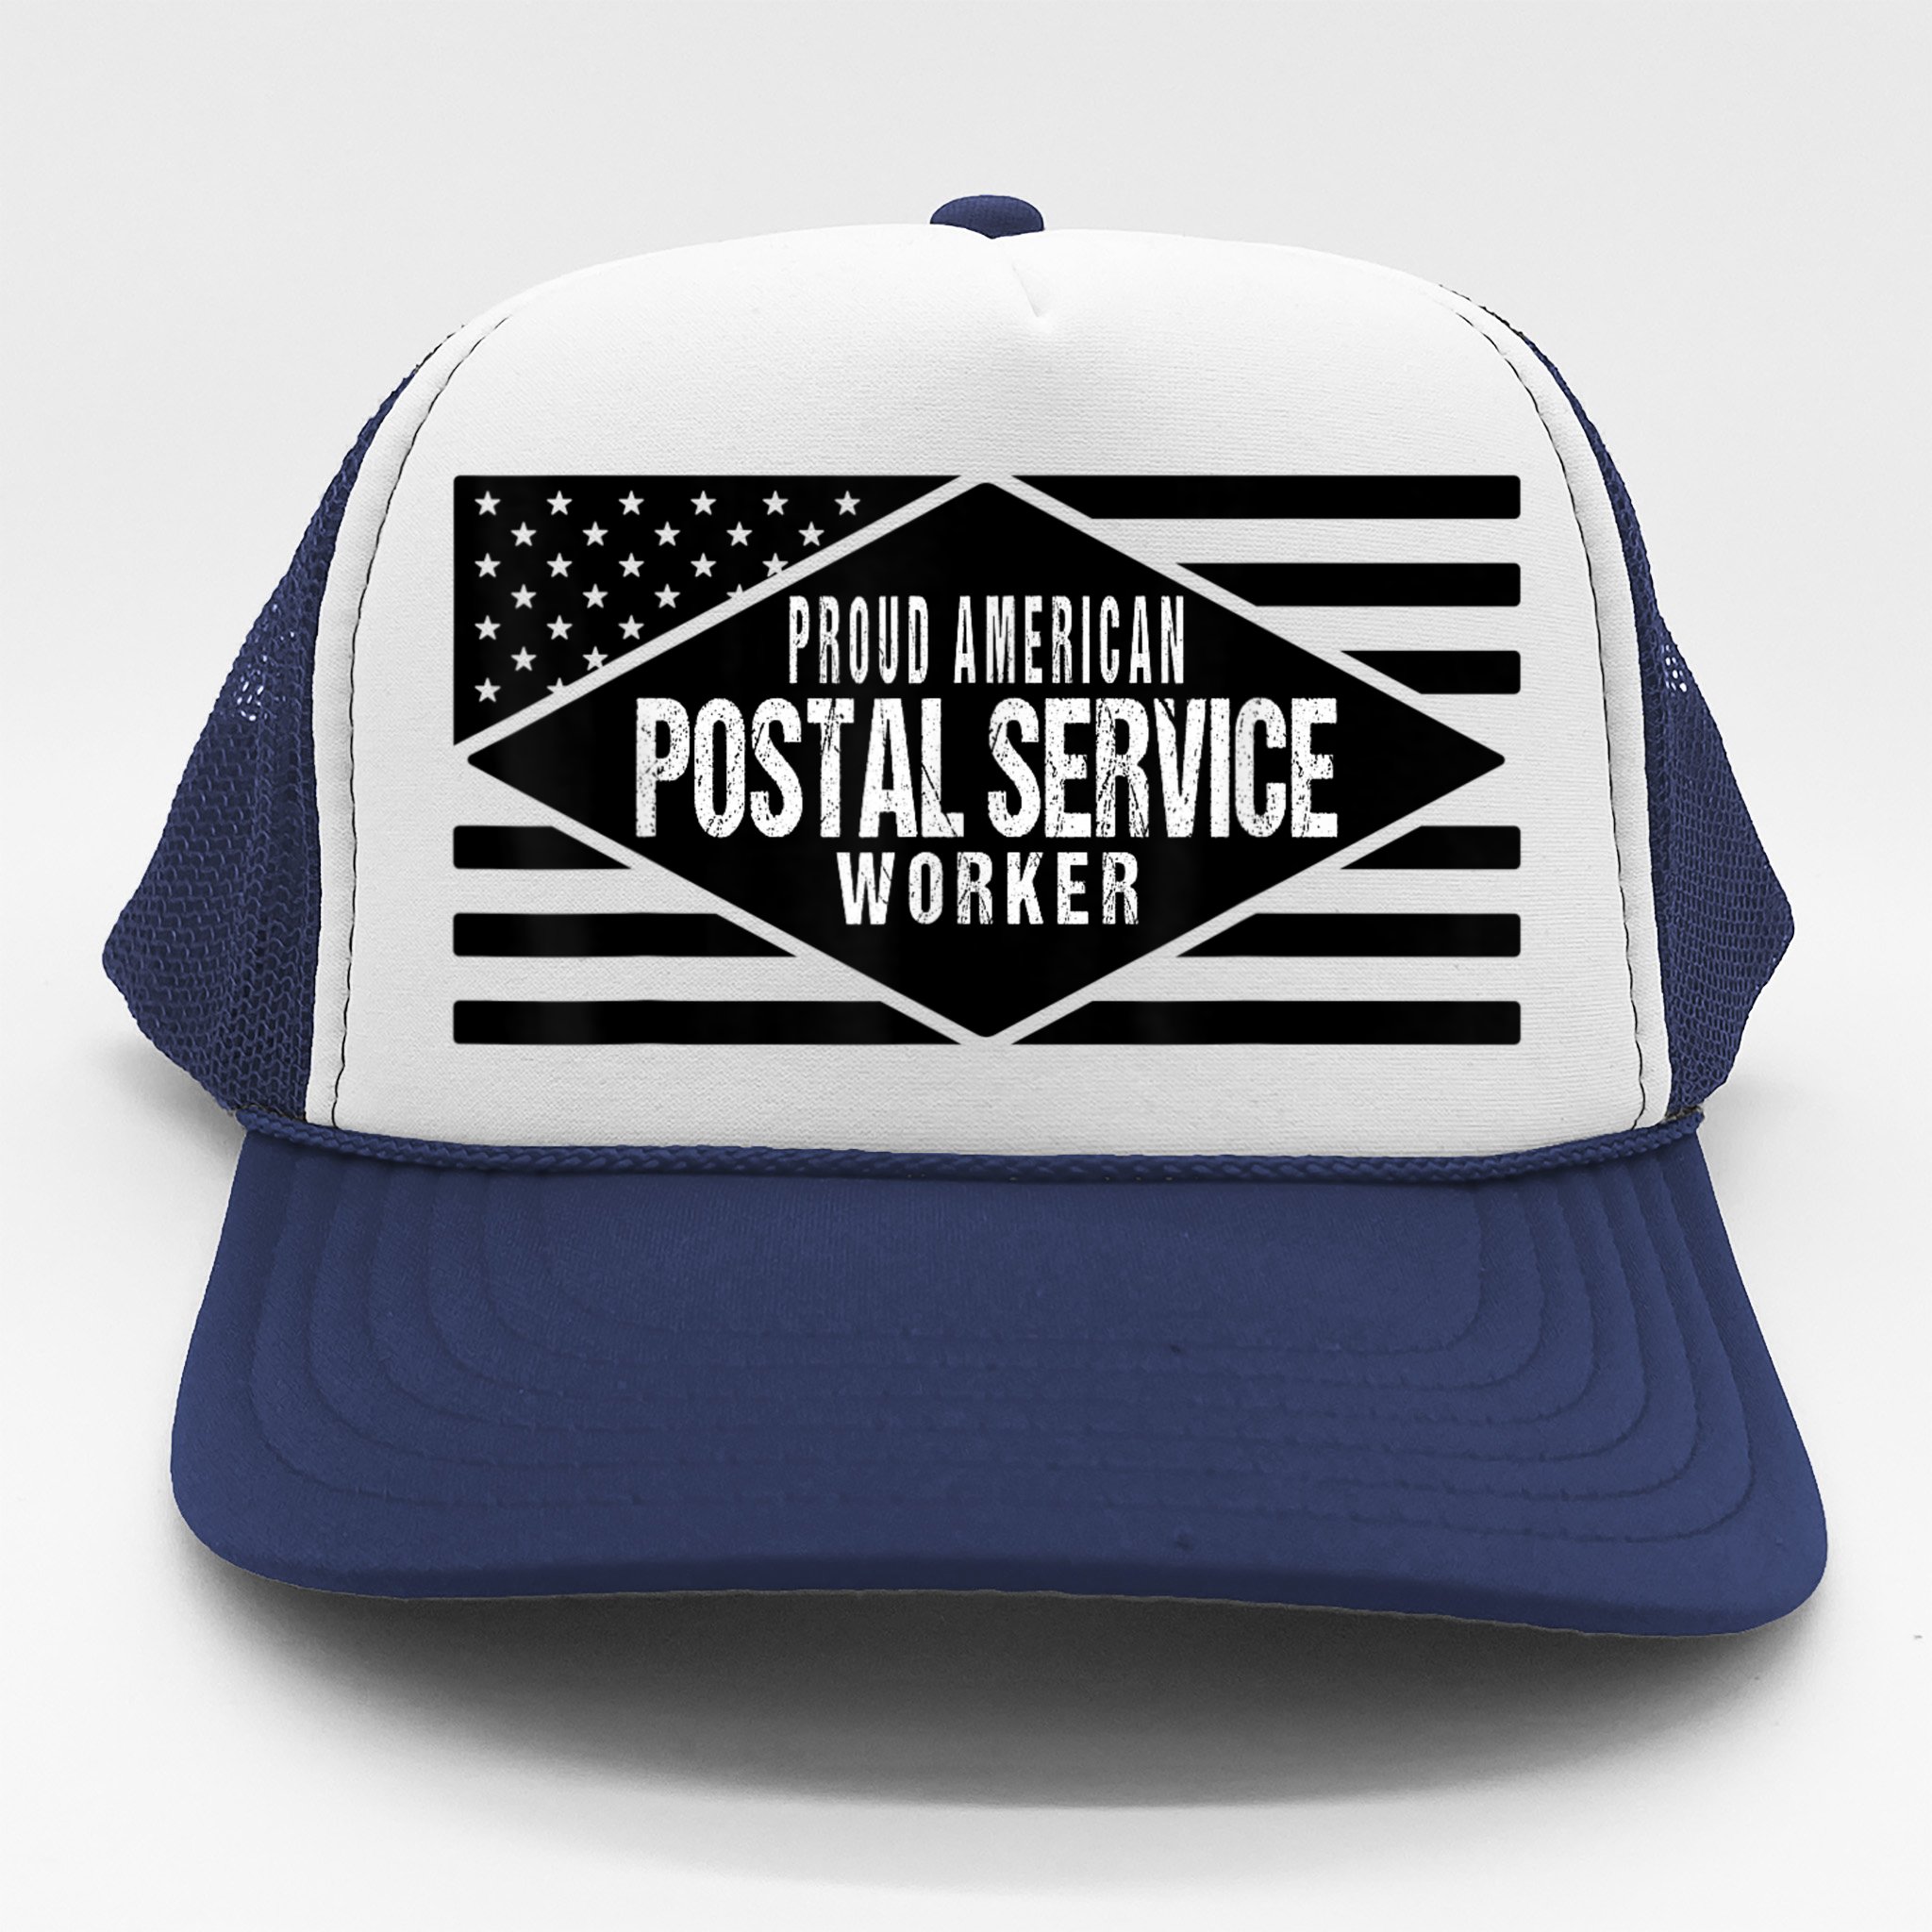 https://images3.teeshirtpalace.com/images/productImages/pap5019481-proud-american-postal-service-worker-patriotic-us-flag--navy-th-garment.jpg